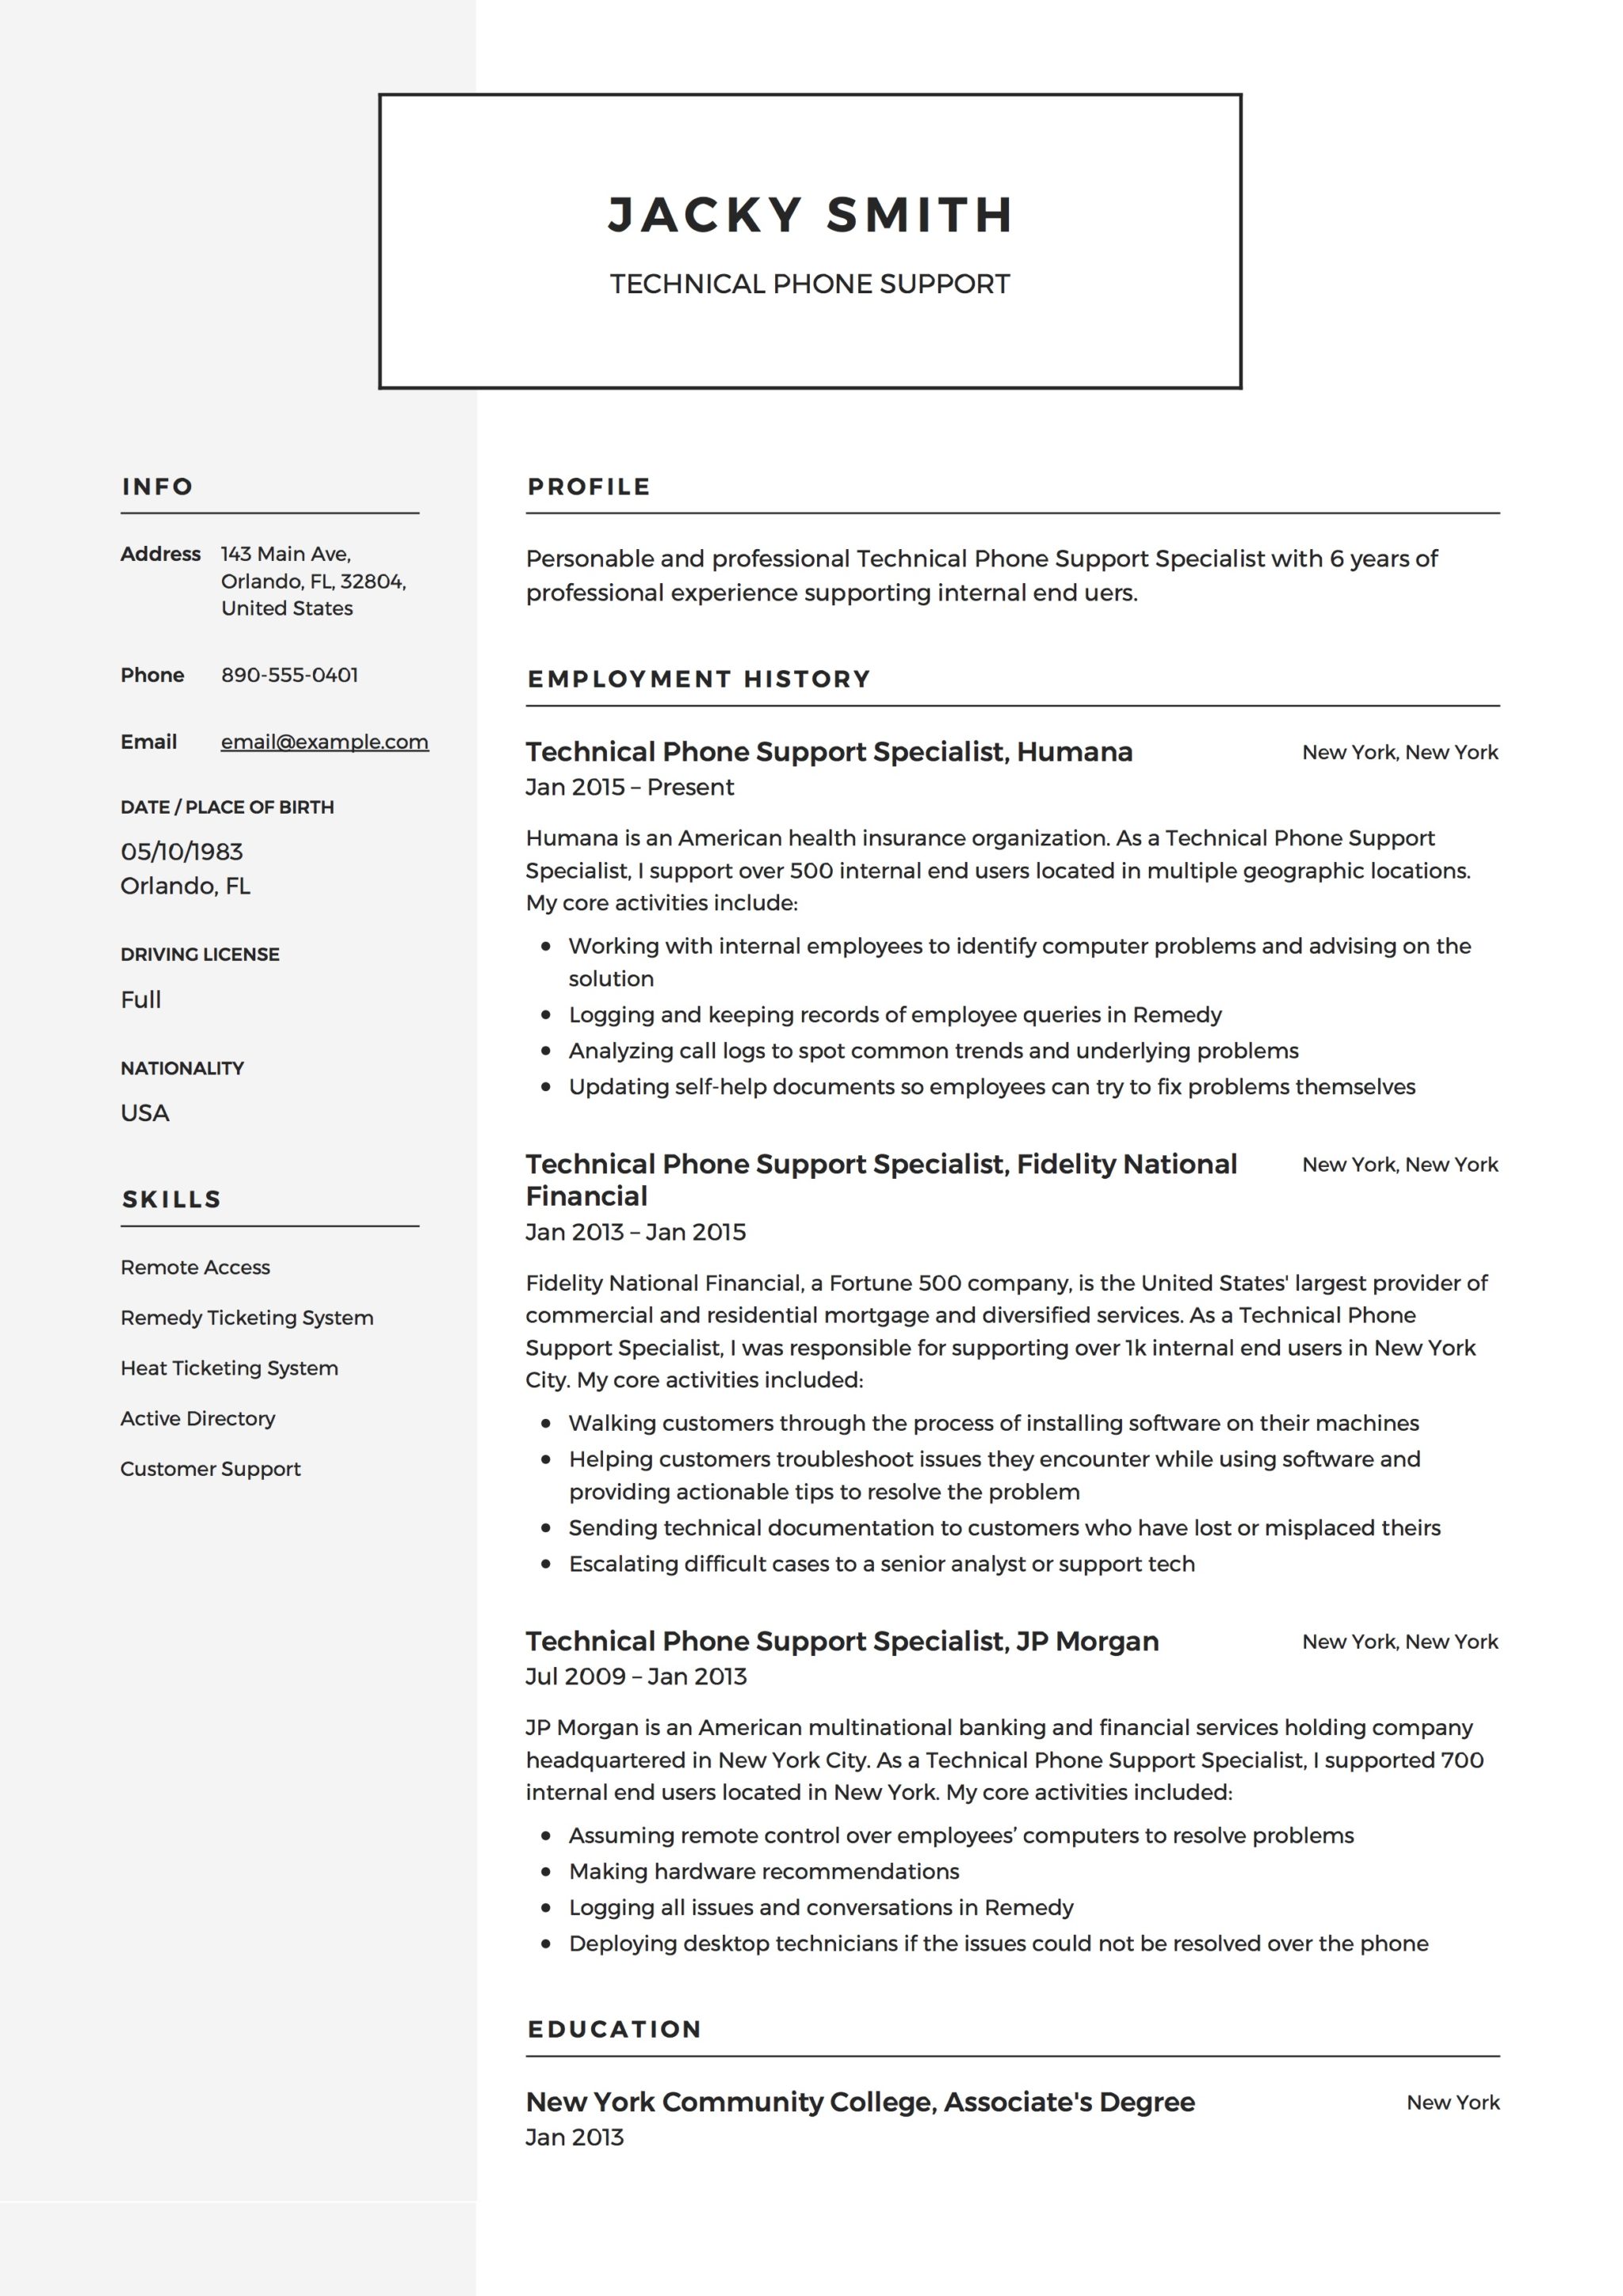 Modern Technical Phone Support Resume Template